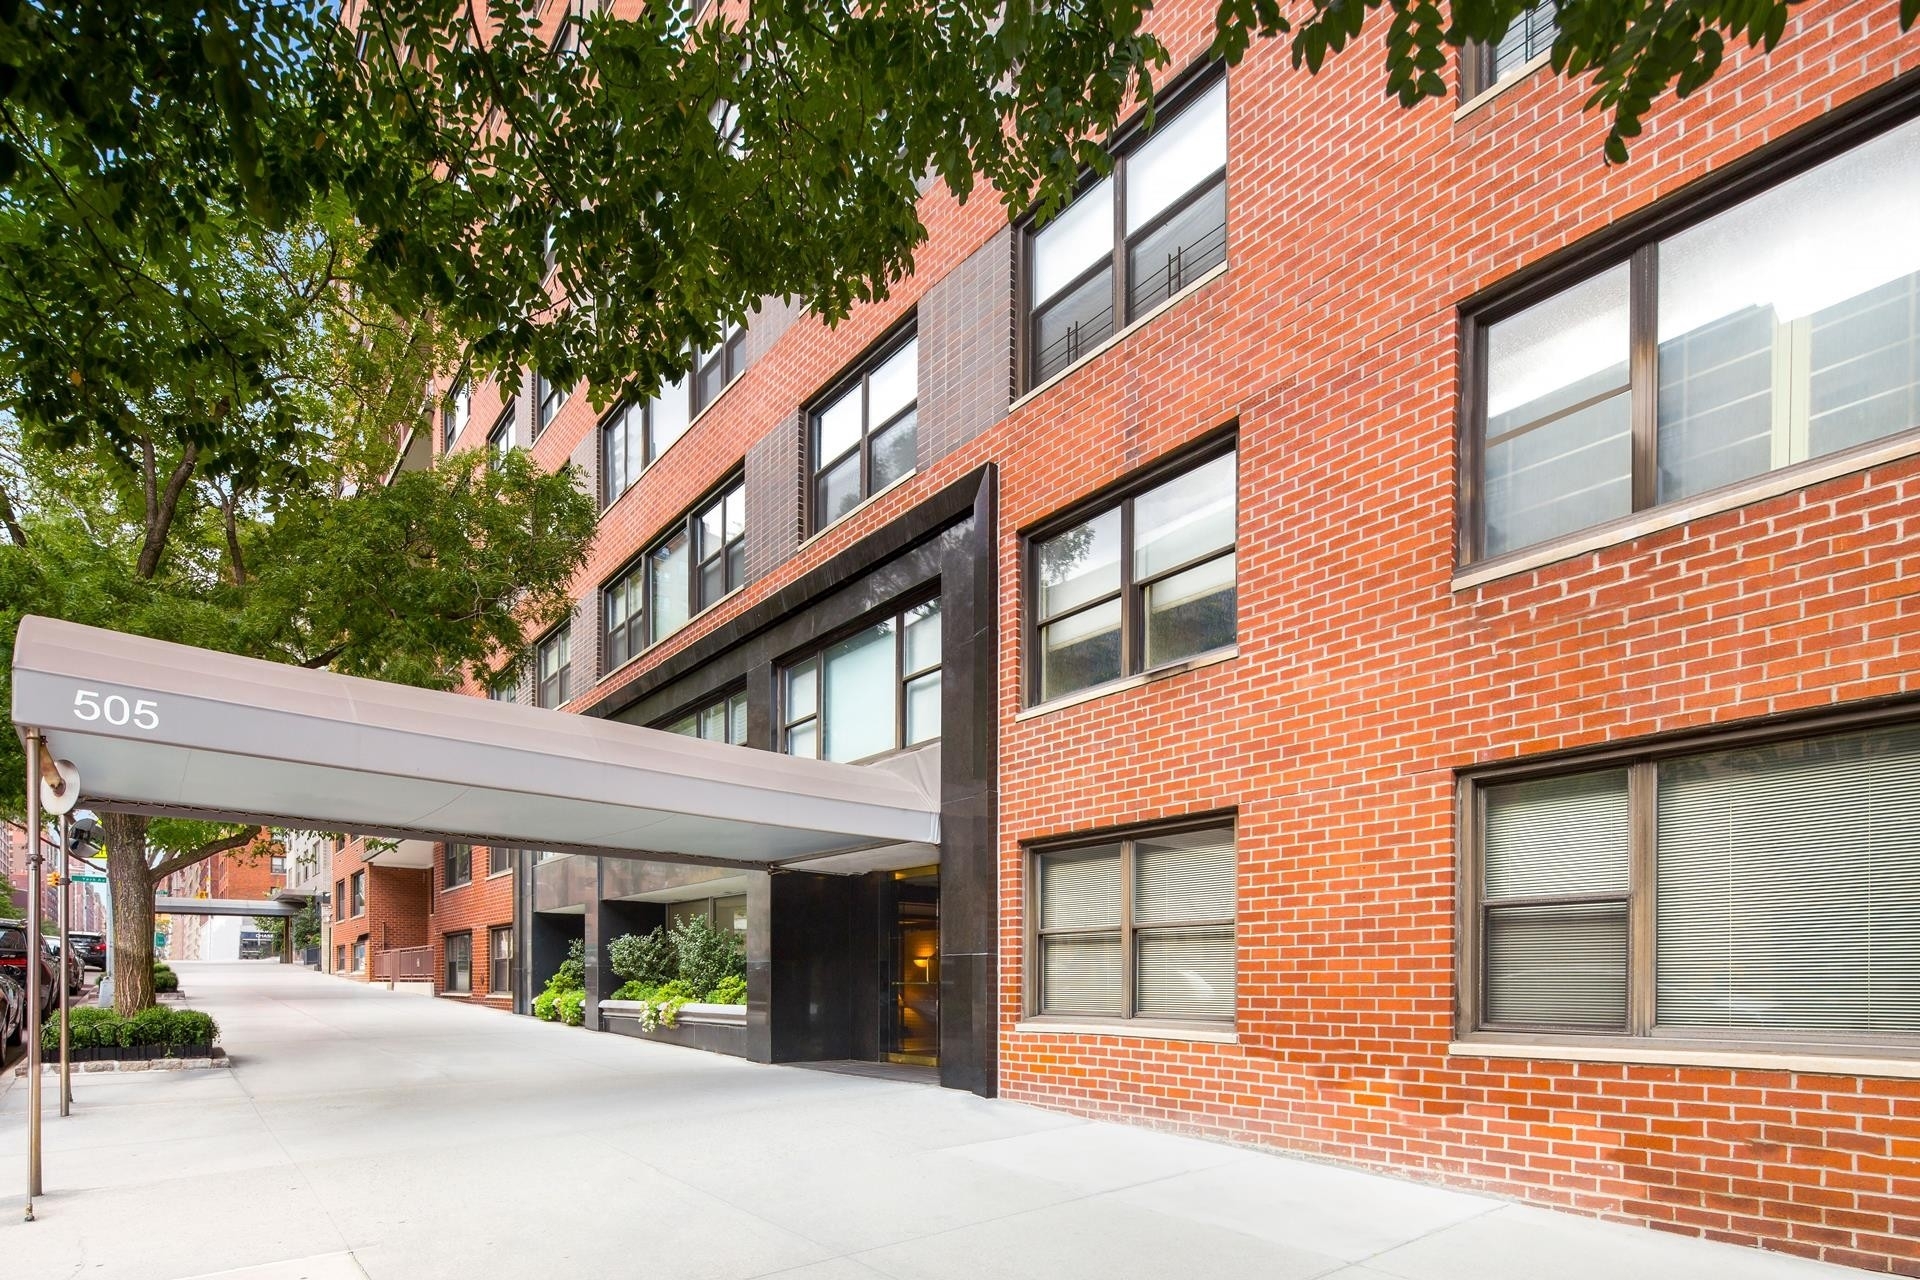 7. Co-op Properties for Sale at East River House, 505 E 79TH ST, 4HJ Yorkville, New York, New York 10075